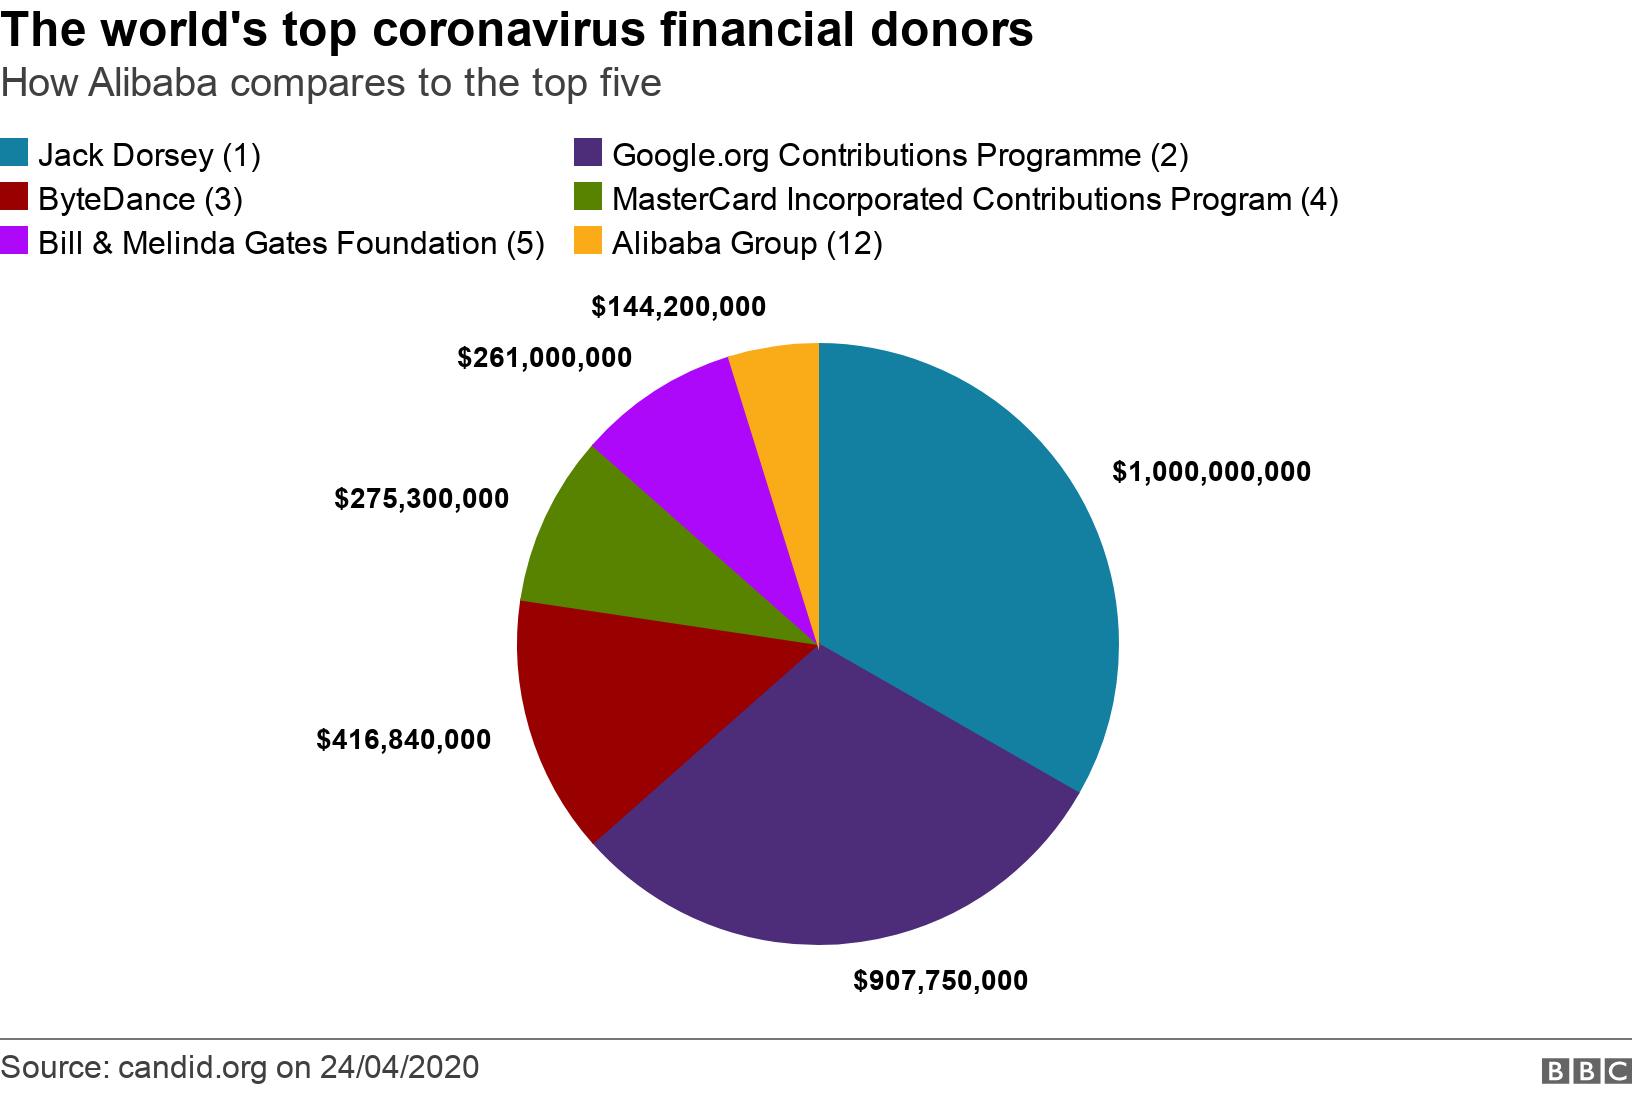 The world's top coronavirus financial donors. How Alibaba compares to the top five. The data shows the top five donors during the coronavirus crisis, according to Candid.org .